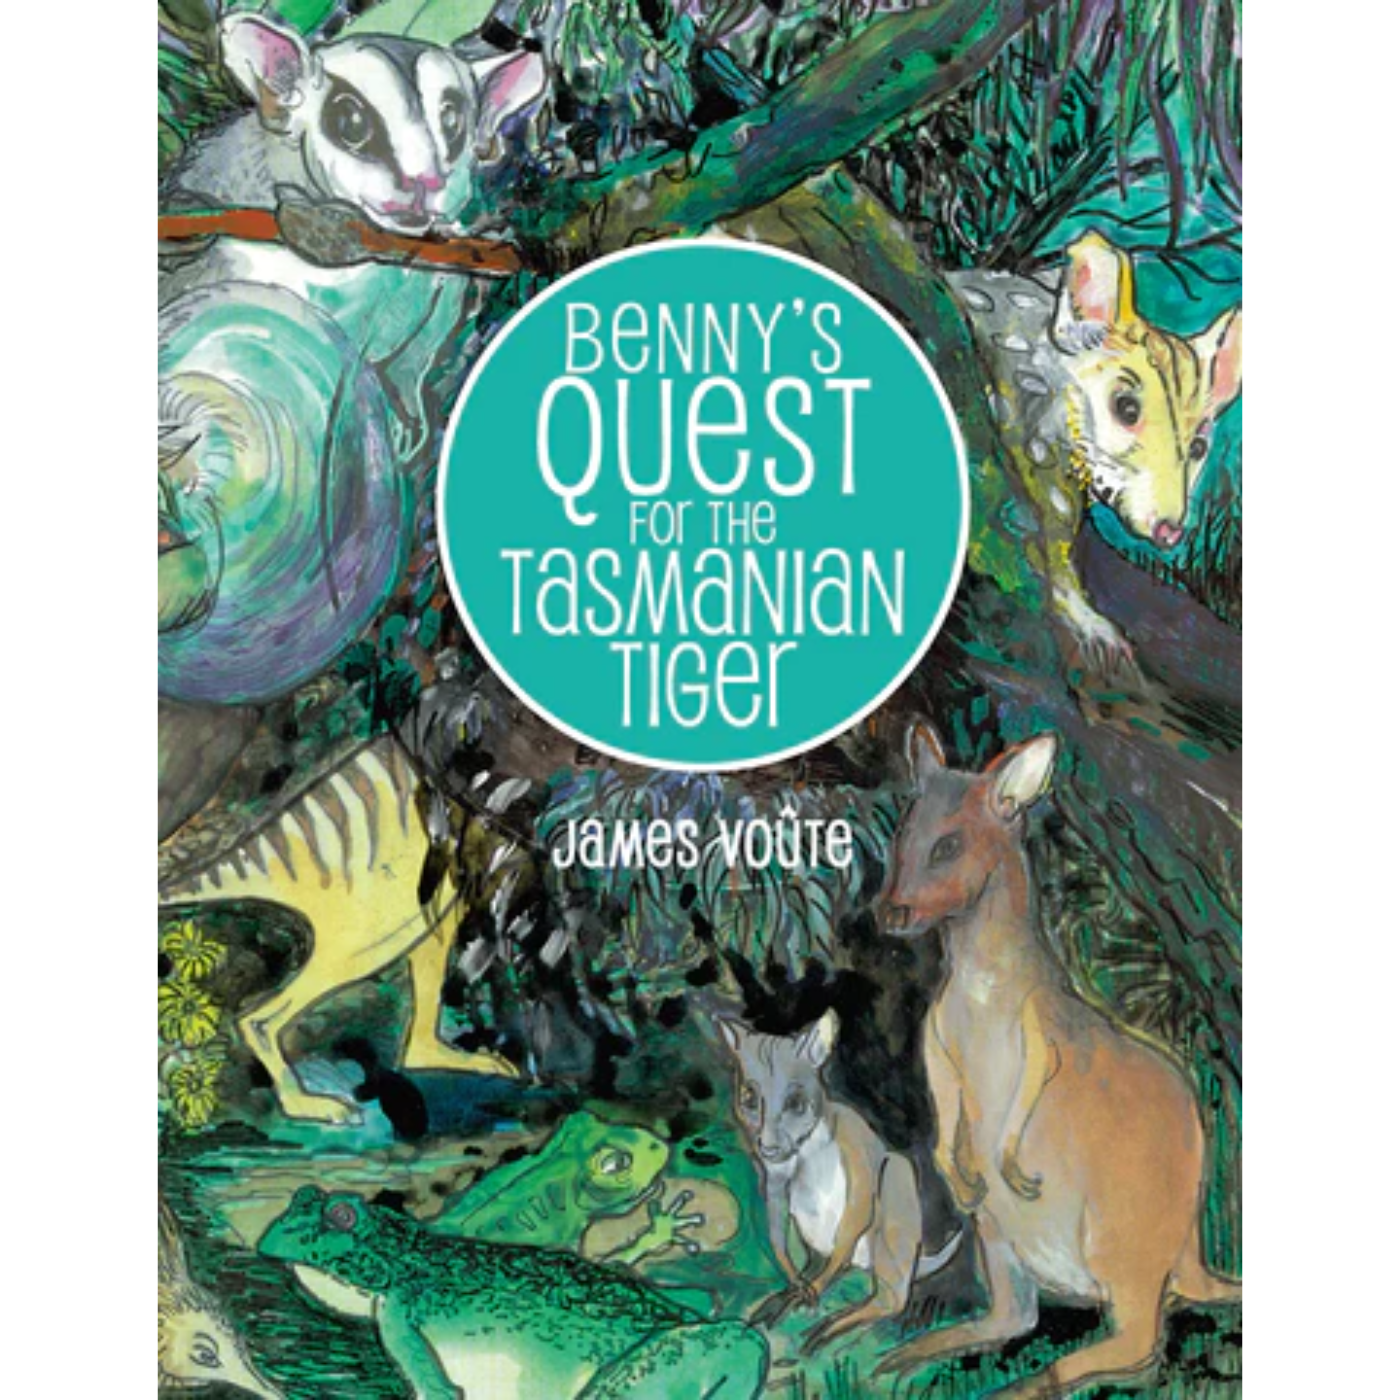 Benny's Quest for the Tasmanian Tiger